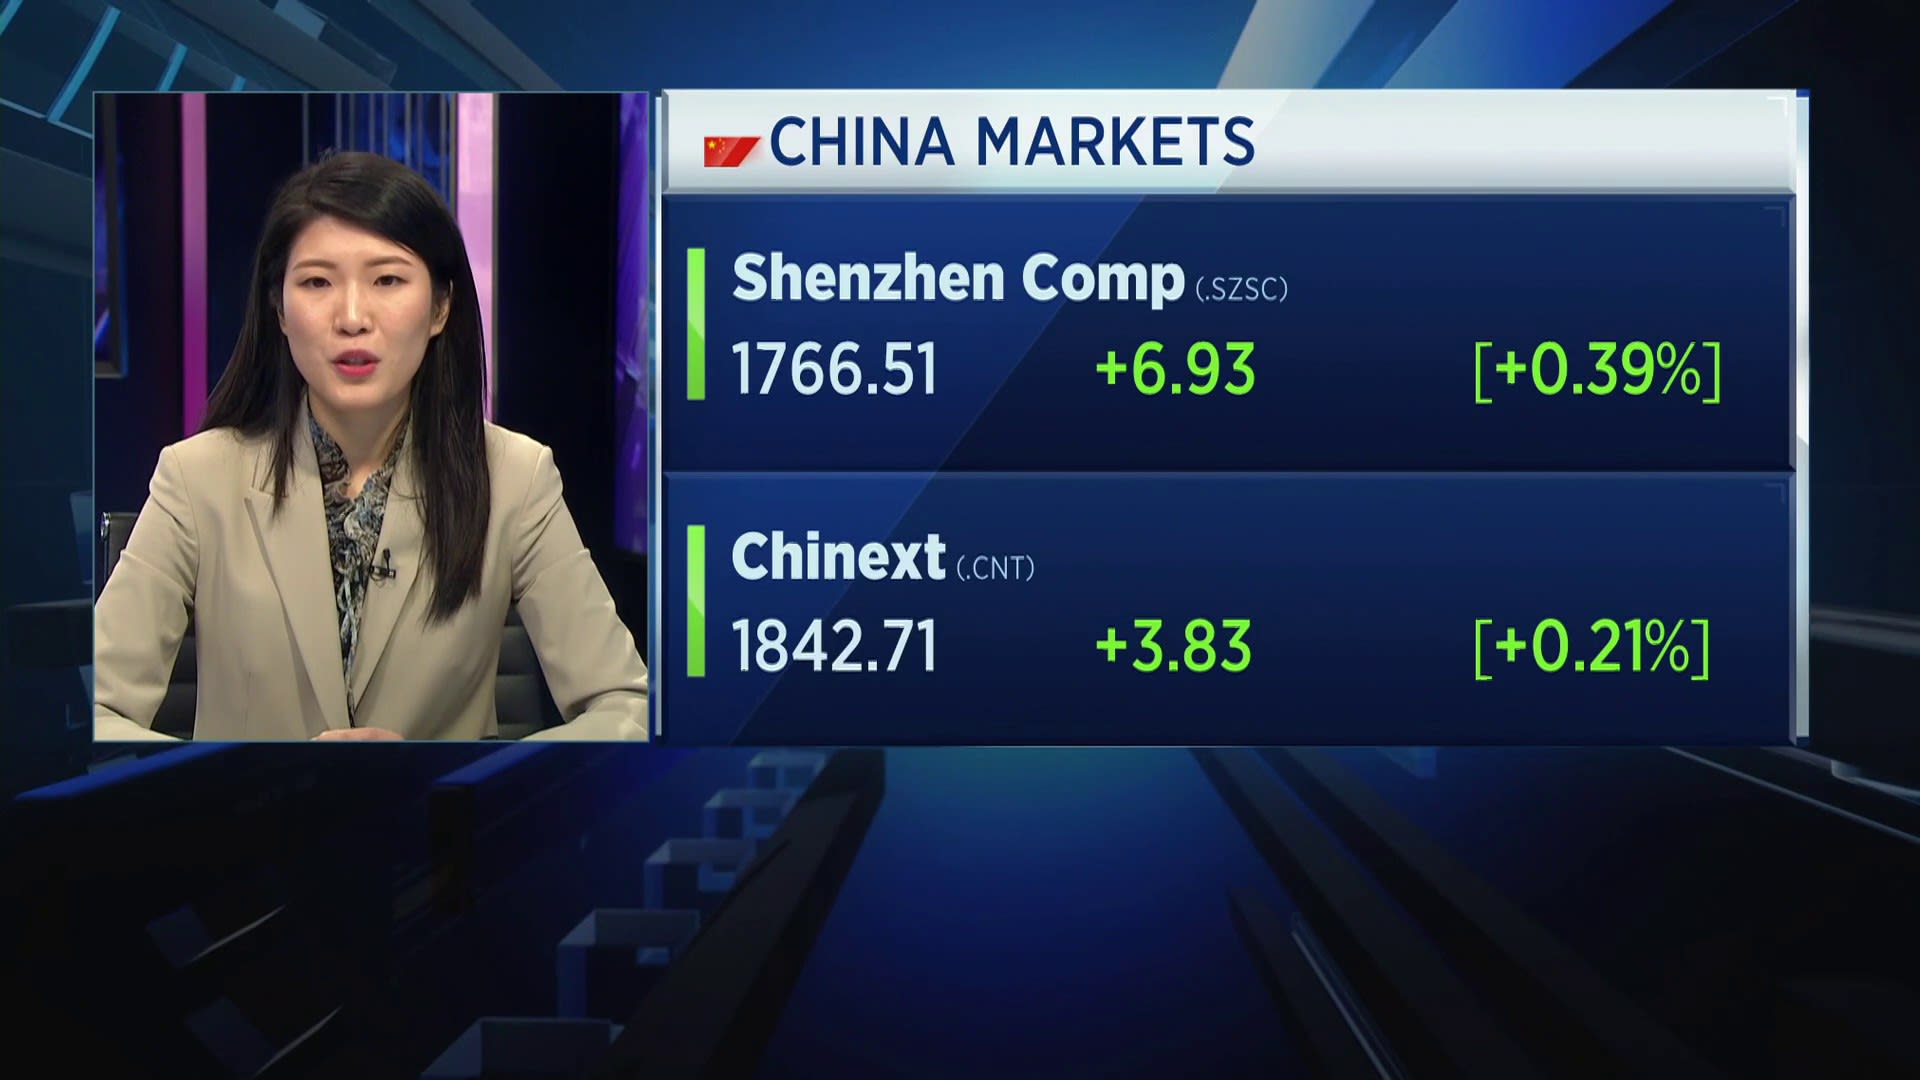 RBC discusses outlook for China markets and its strategy [Video]